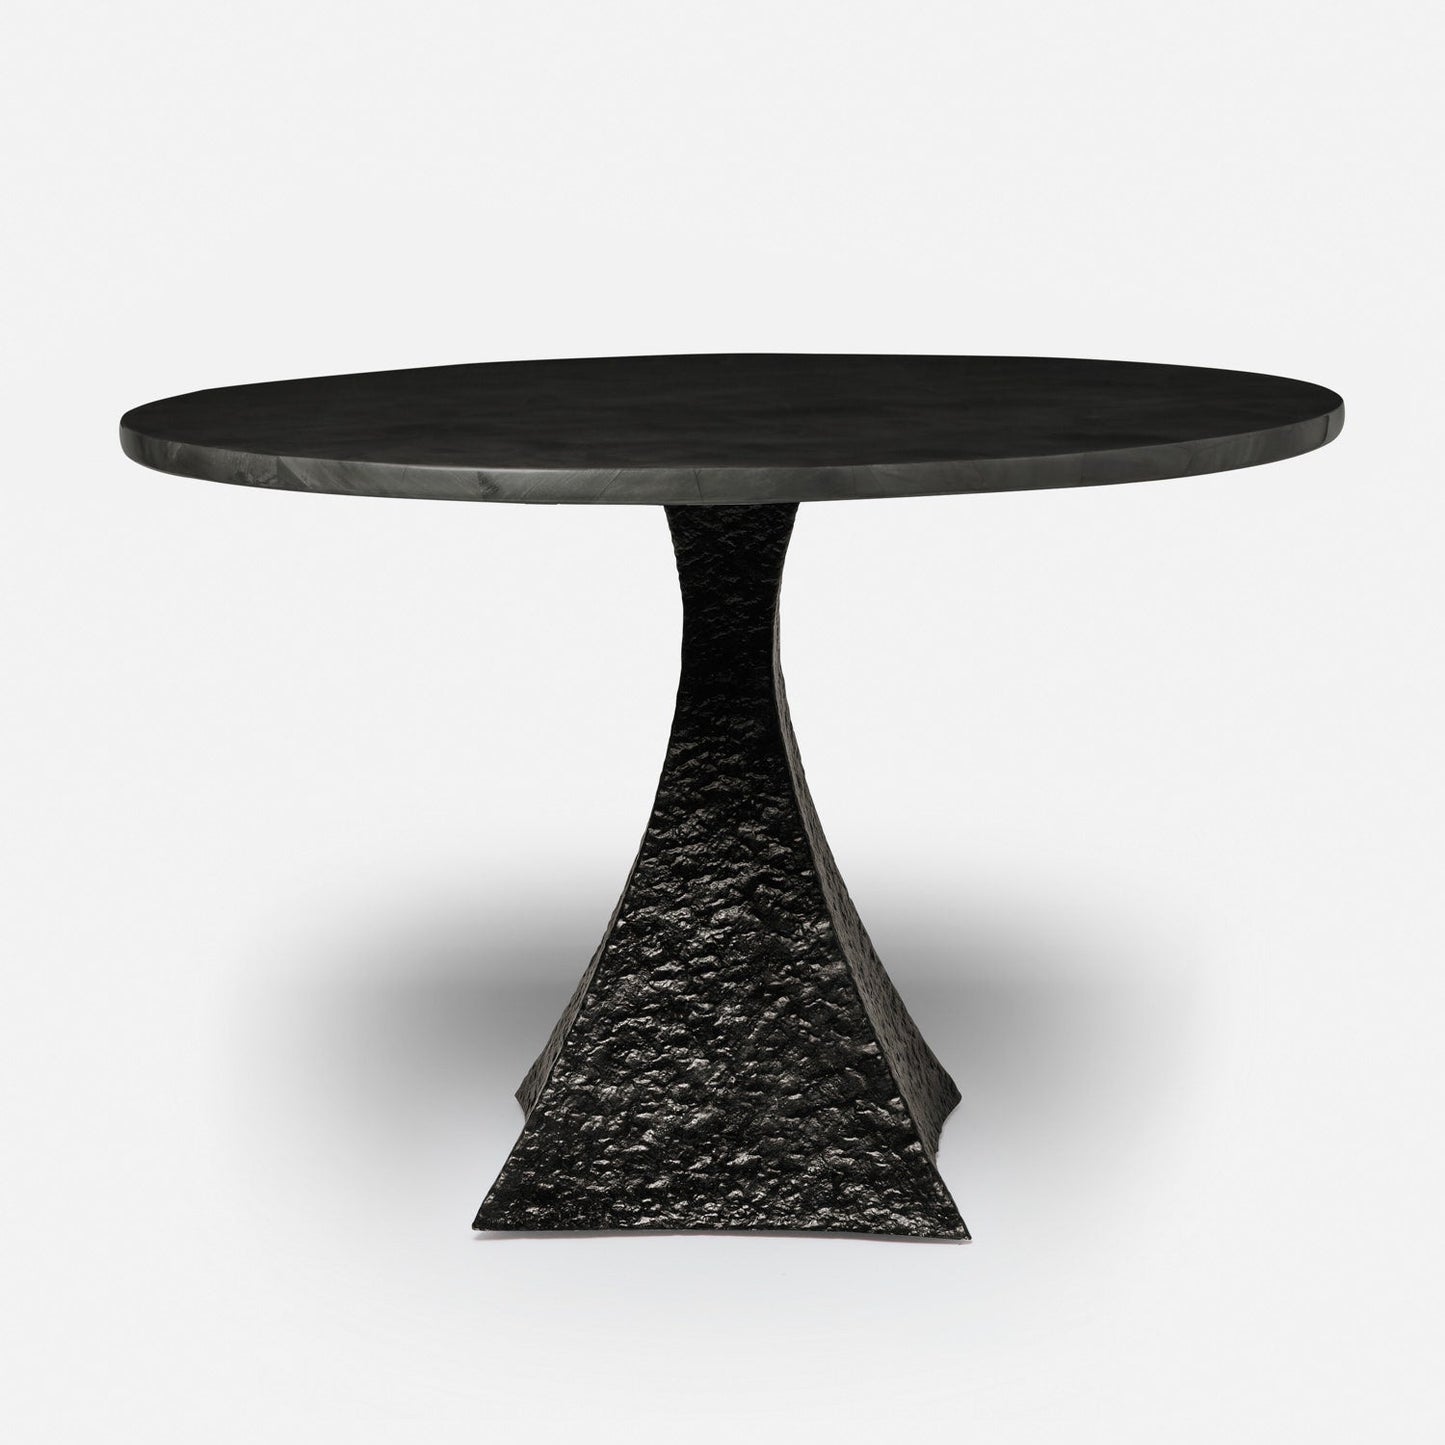 Made Goods Noor 48" x 30" Bumpy Black Iron Dinning Table With Round Dark Faux Horn Table Top